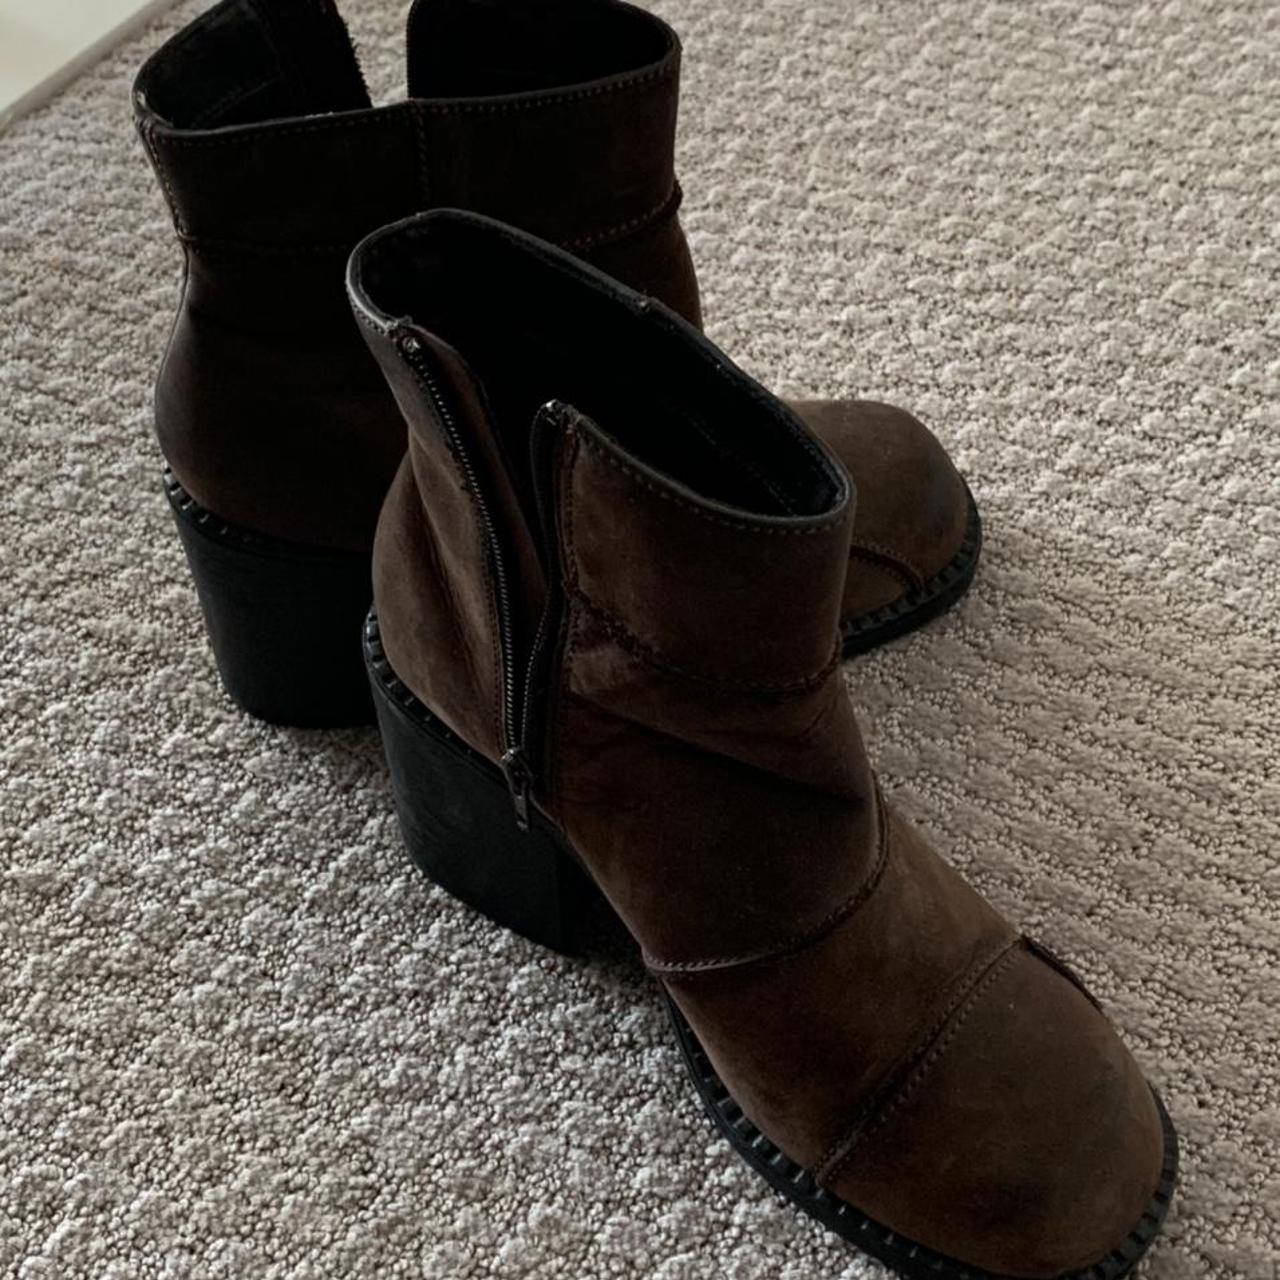 Union Bay Women's Brown Boots